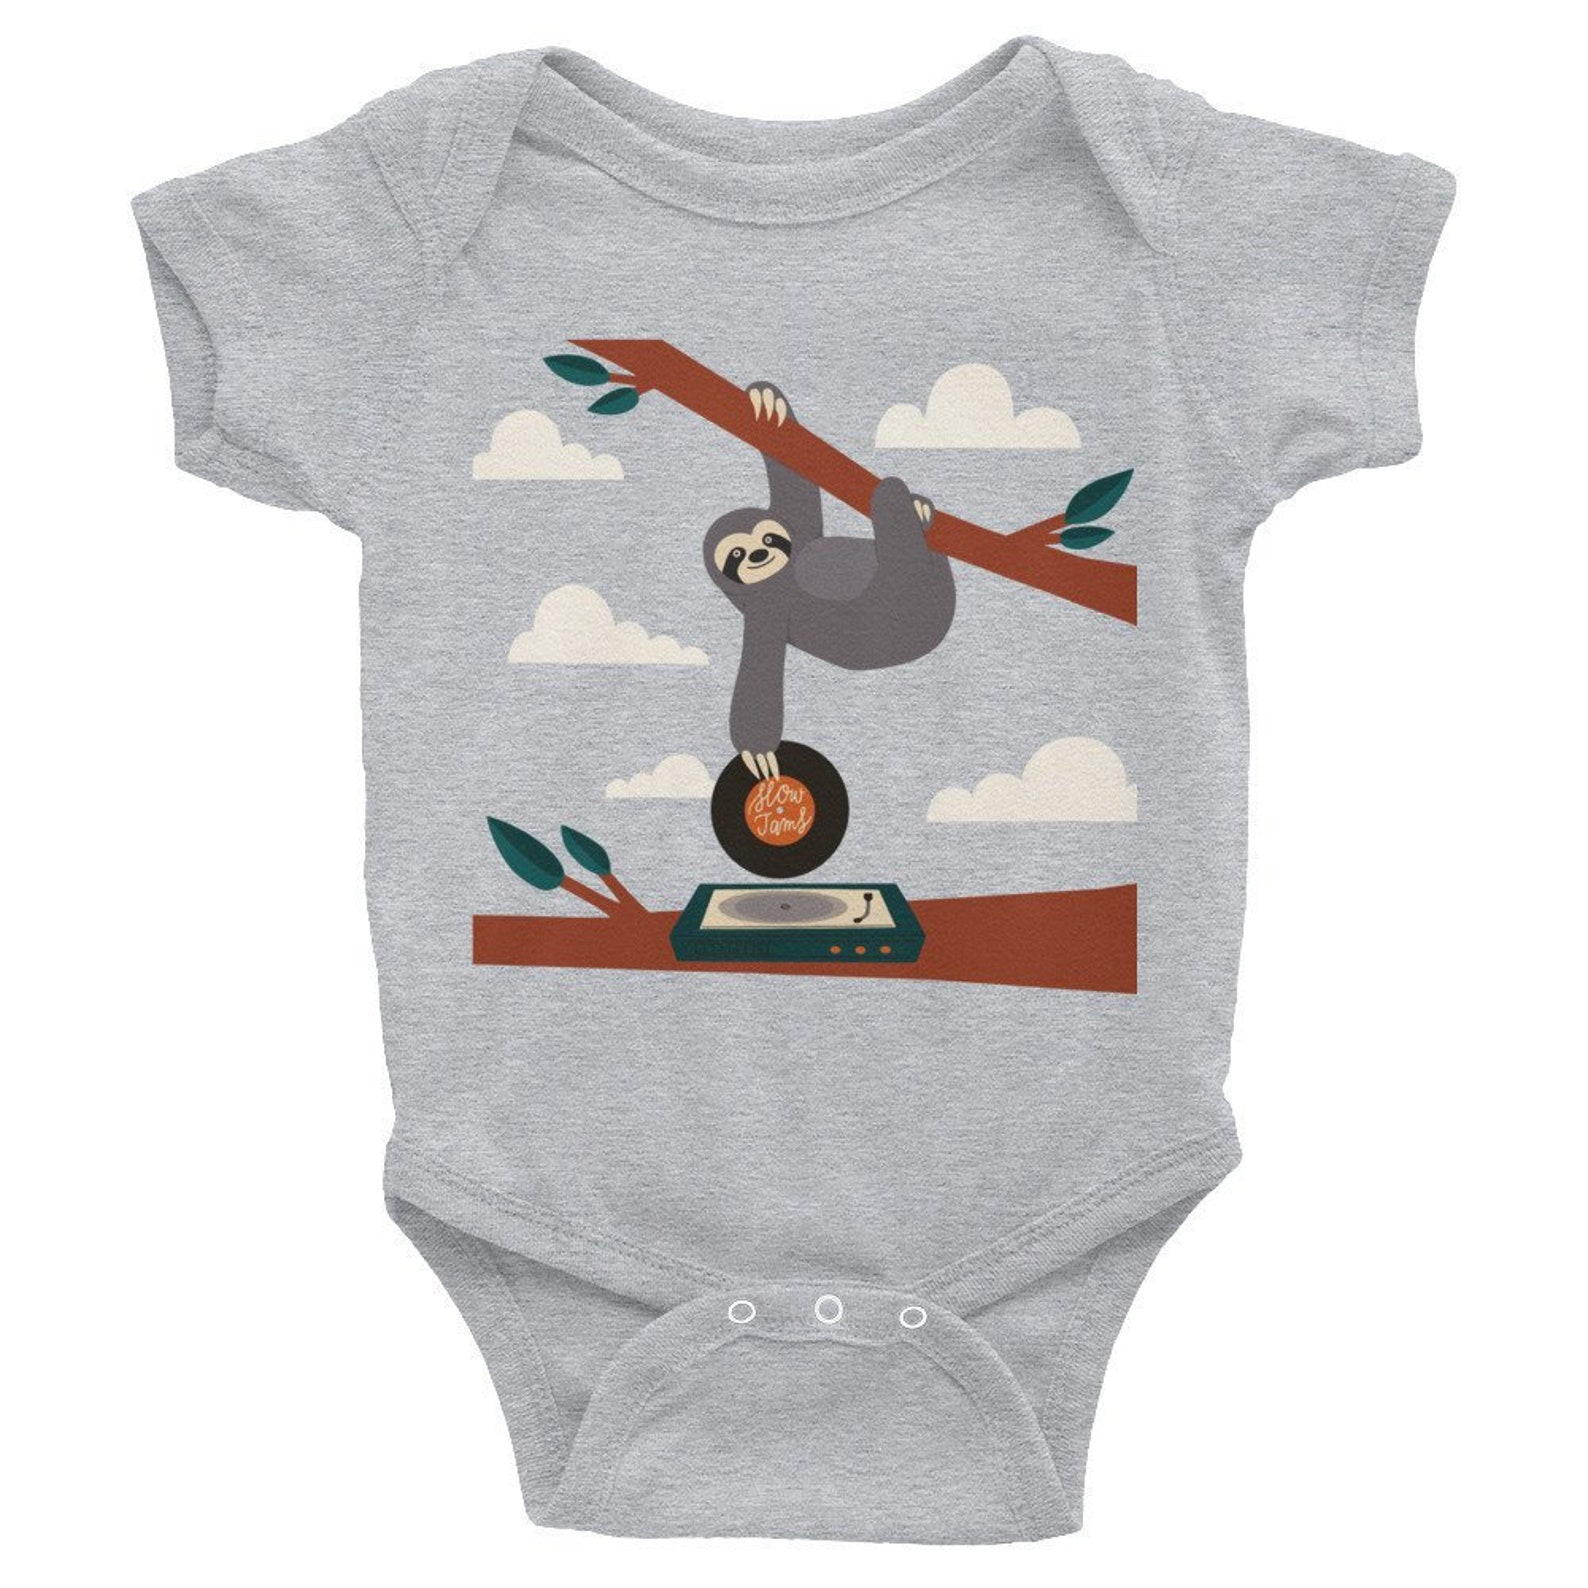 Slow Jams Sloth Baby Clothes Music Baby Long-sleeve Onesie | Etsy